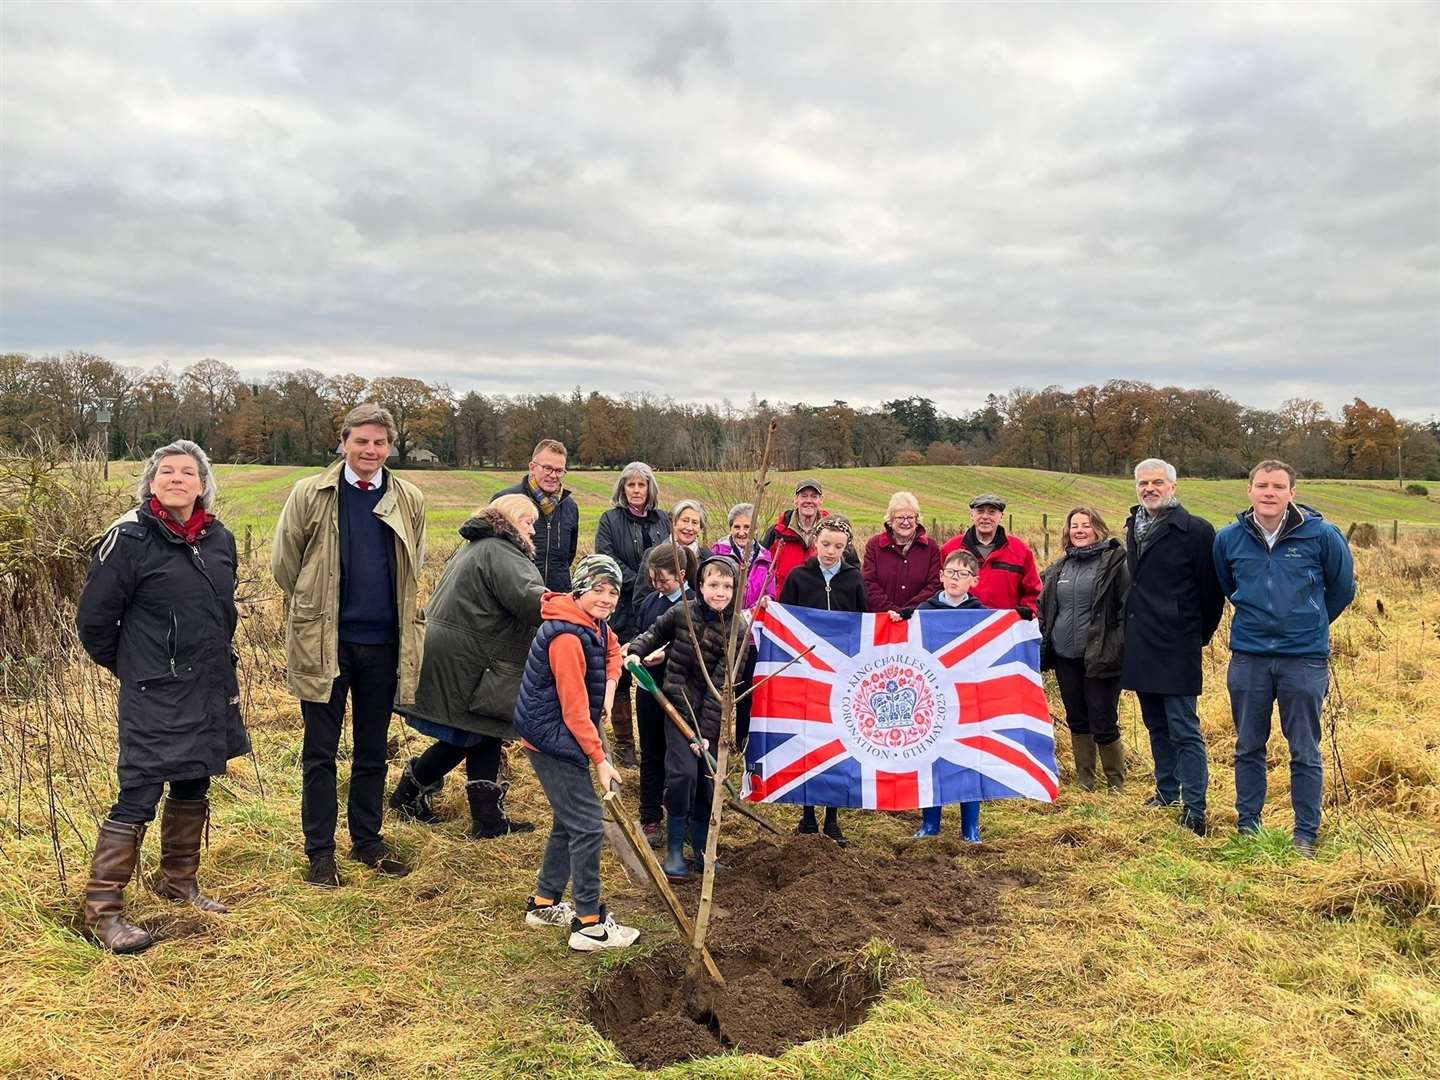 The community attending the tree planting ceremony in Cawdor at the Jubilee Wood, next to Ballichknockan Farm.